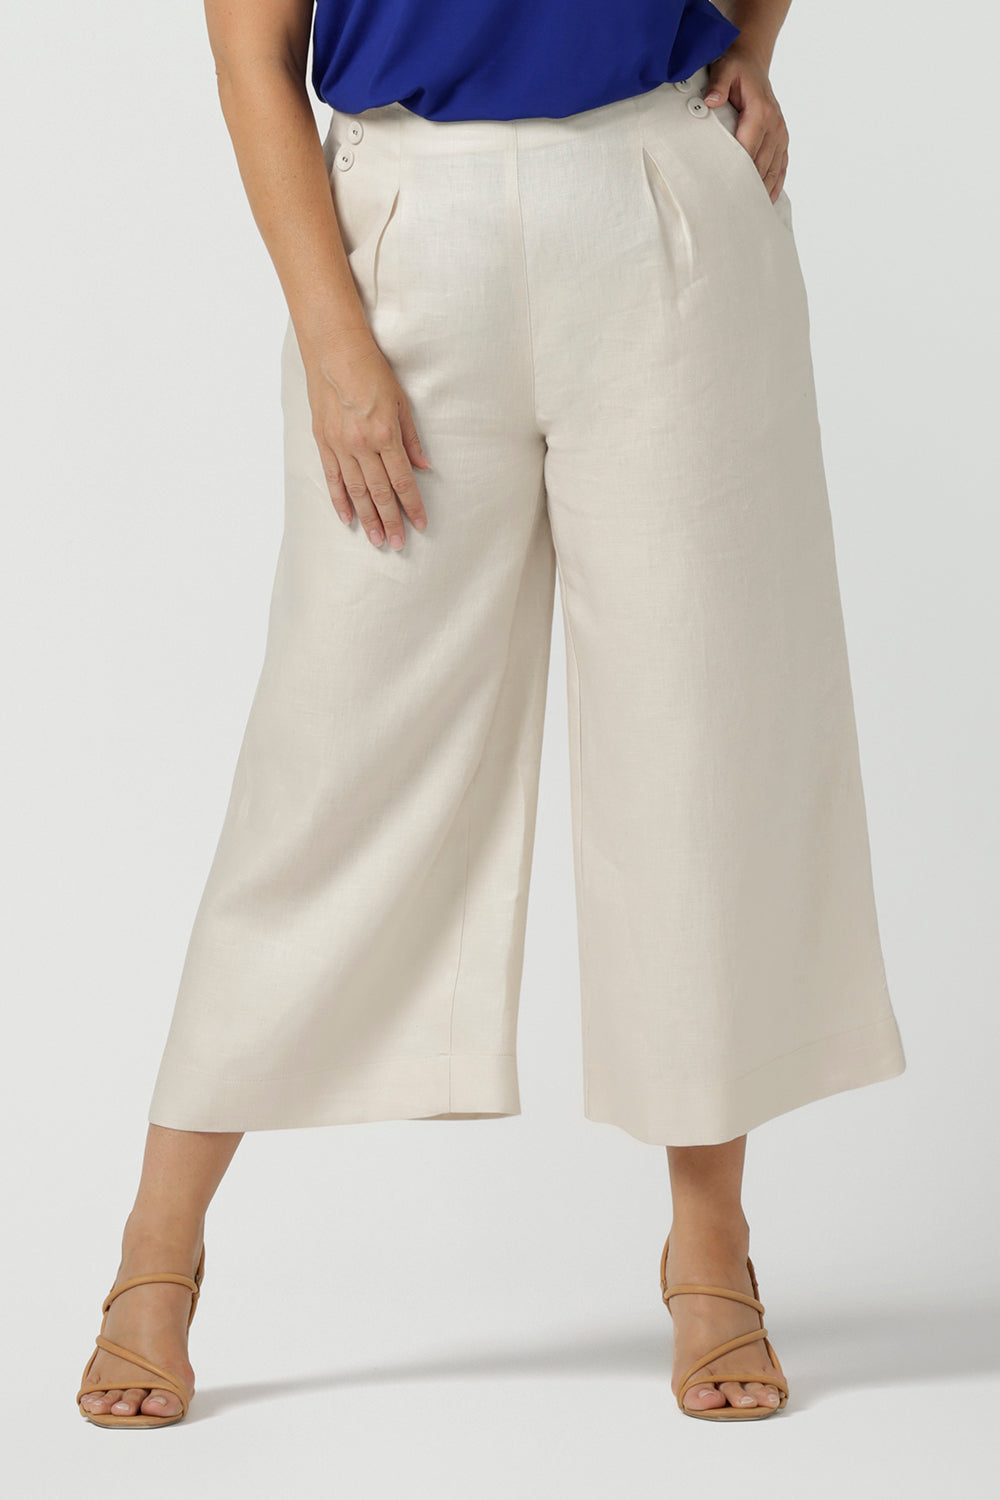 Close up of a size 12 woman wears the Nik Pant in Parchment Linen. A high waist tailored pant with buttons and pleats at the front. Made in natural linen a breathable fibre that is great for the warmer months. Styled back with a Cobalt Eddy Cami top. Made in Australia for women size 8 - 24.